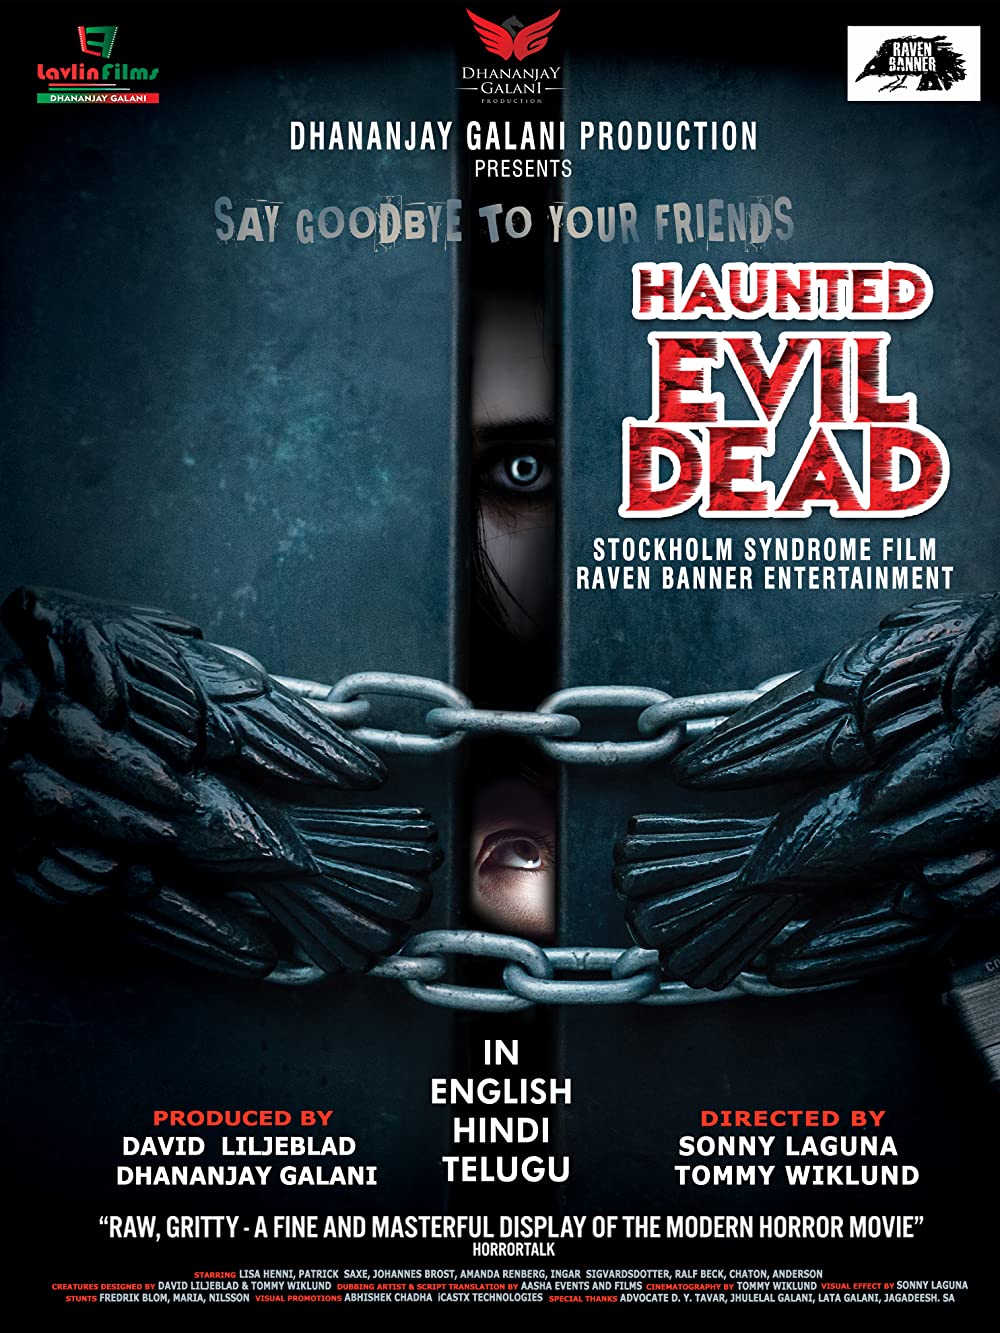 Haunted Evil Dead 2021 Hindi Dubbed ORG 720p HDRip 950MB Download